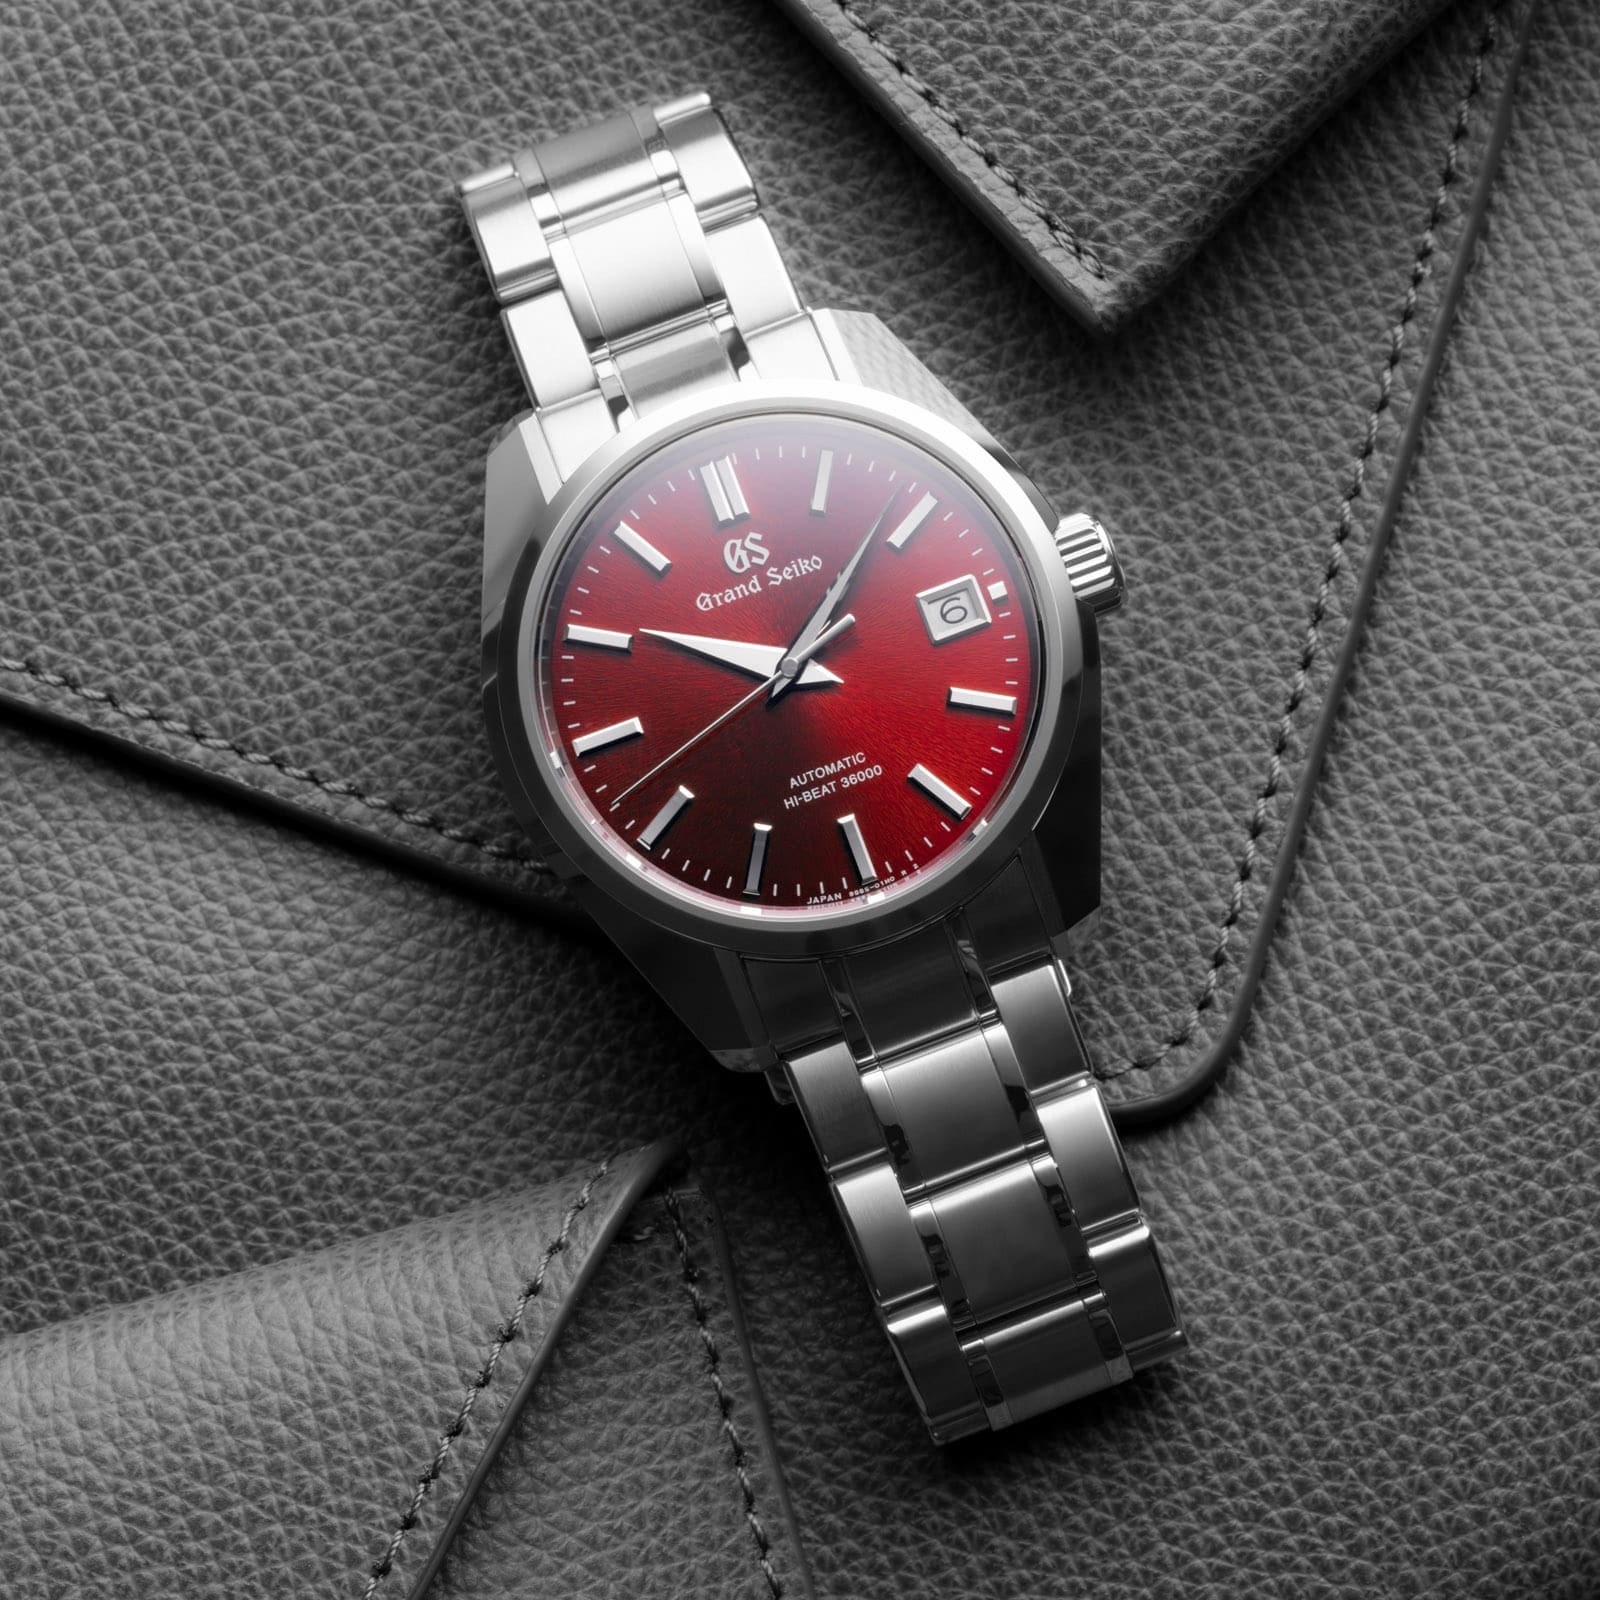 The Grand Seiko SBGH345 is a new Ever-Brilliant Steel online exclusive with a red Mt. Iwate dial